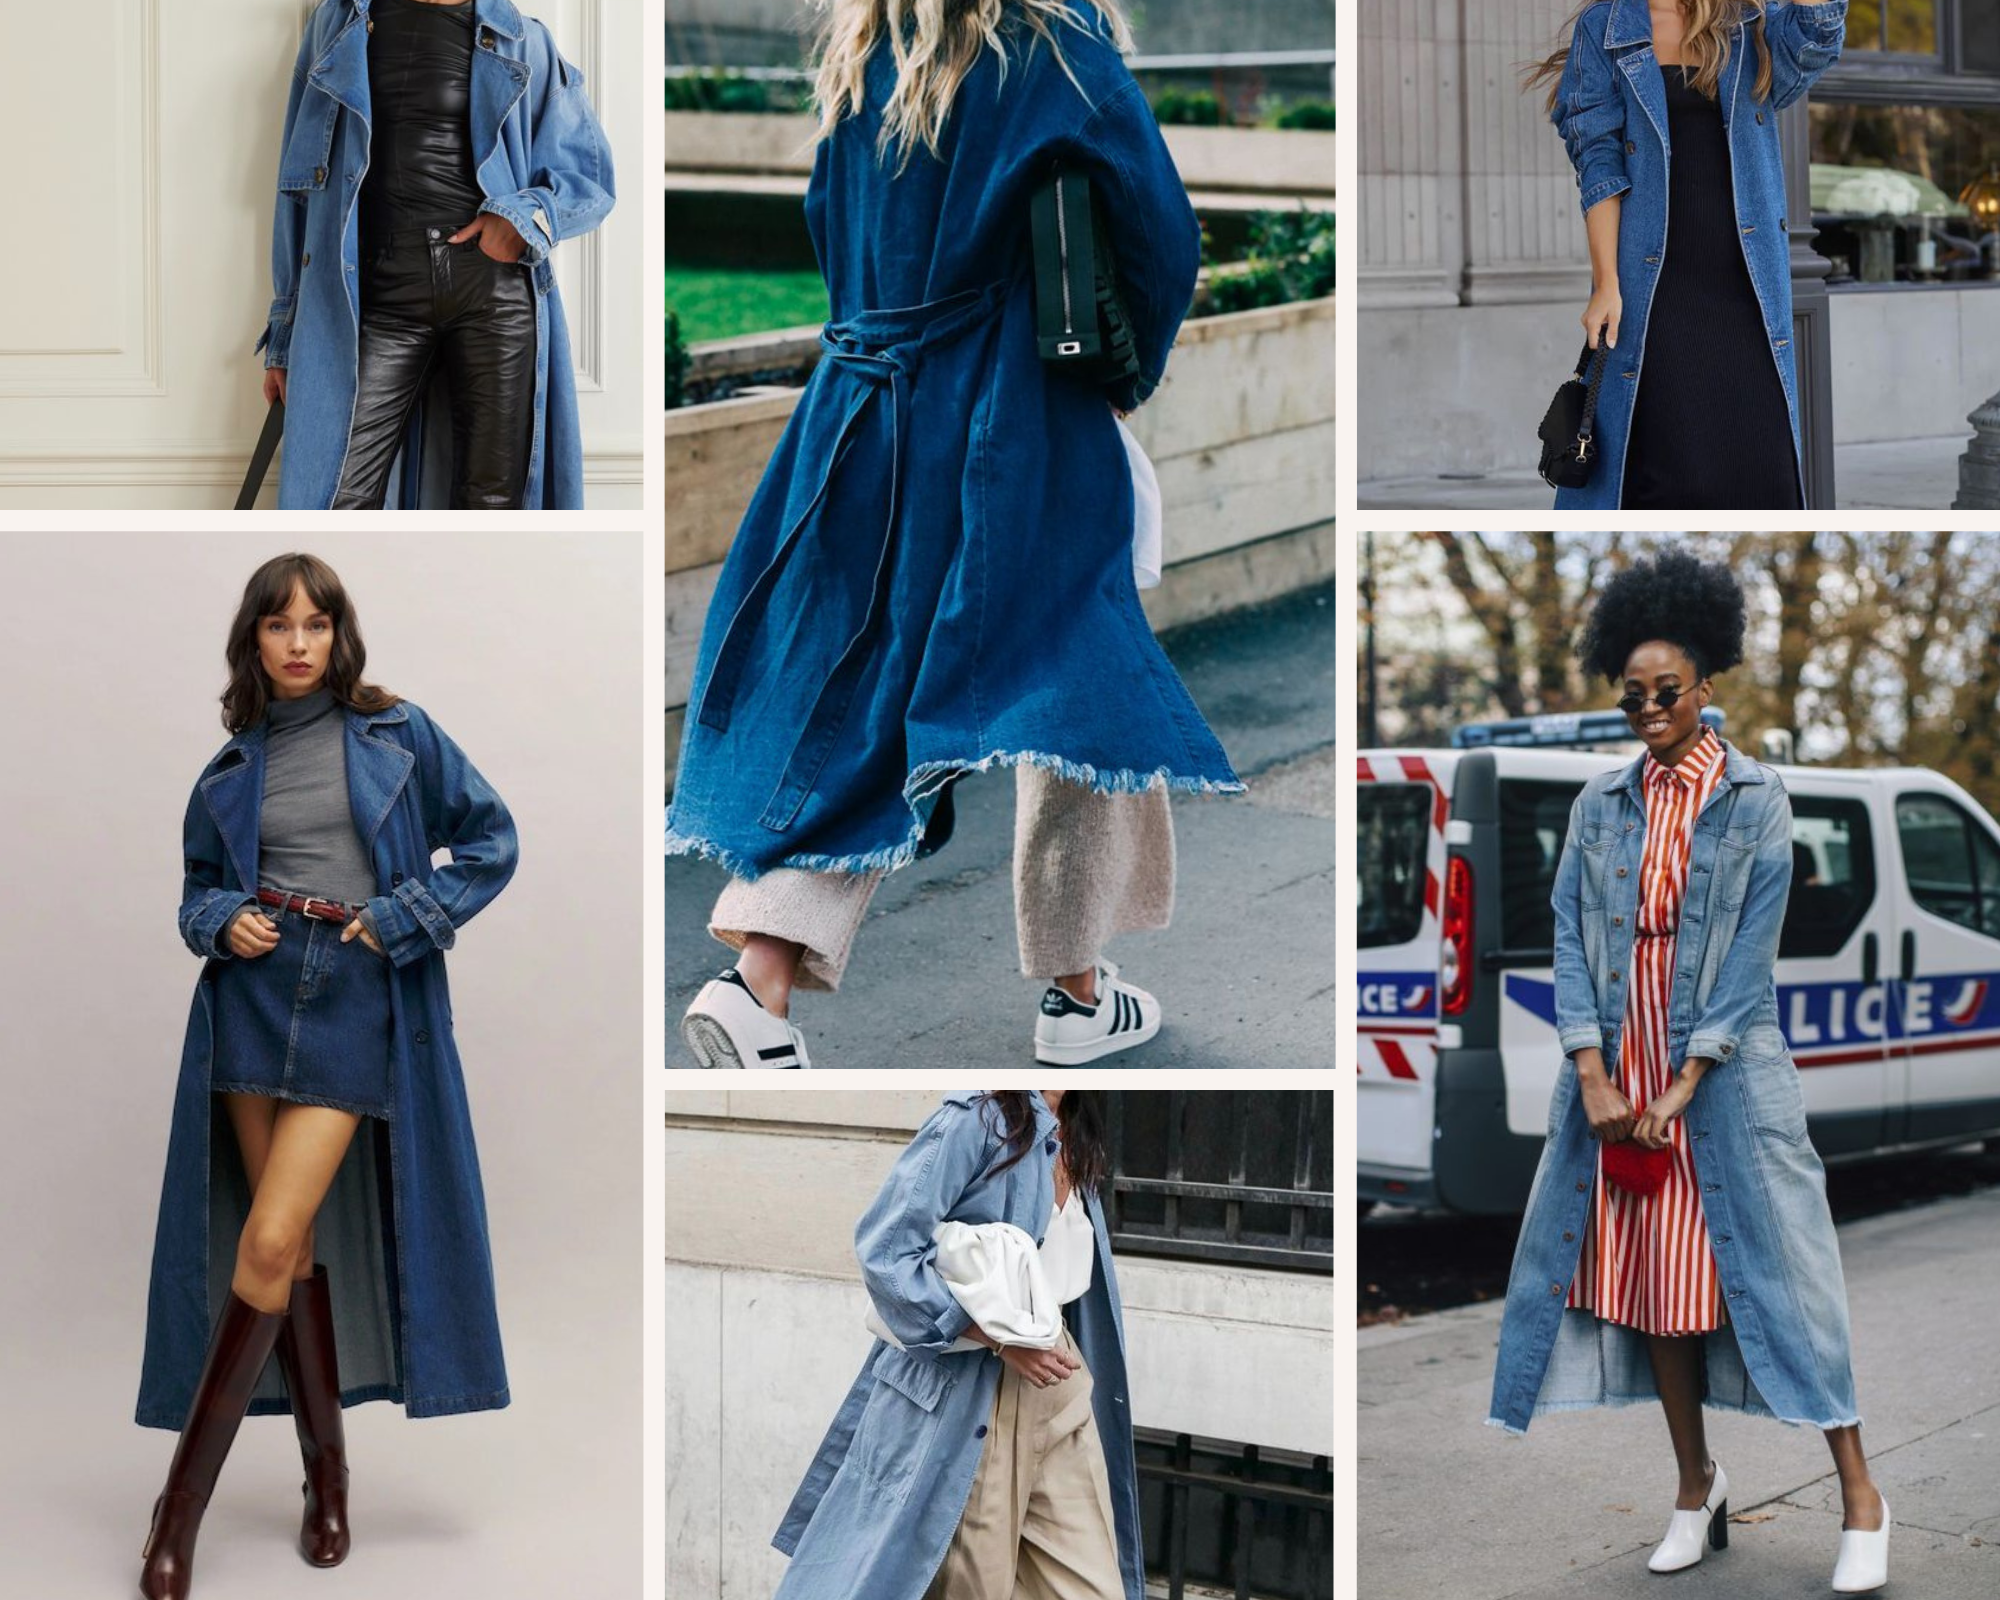 Stylist Q&A: How do I style a denim trench coat? – Threadicated